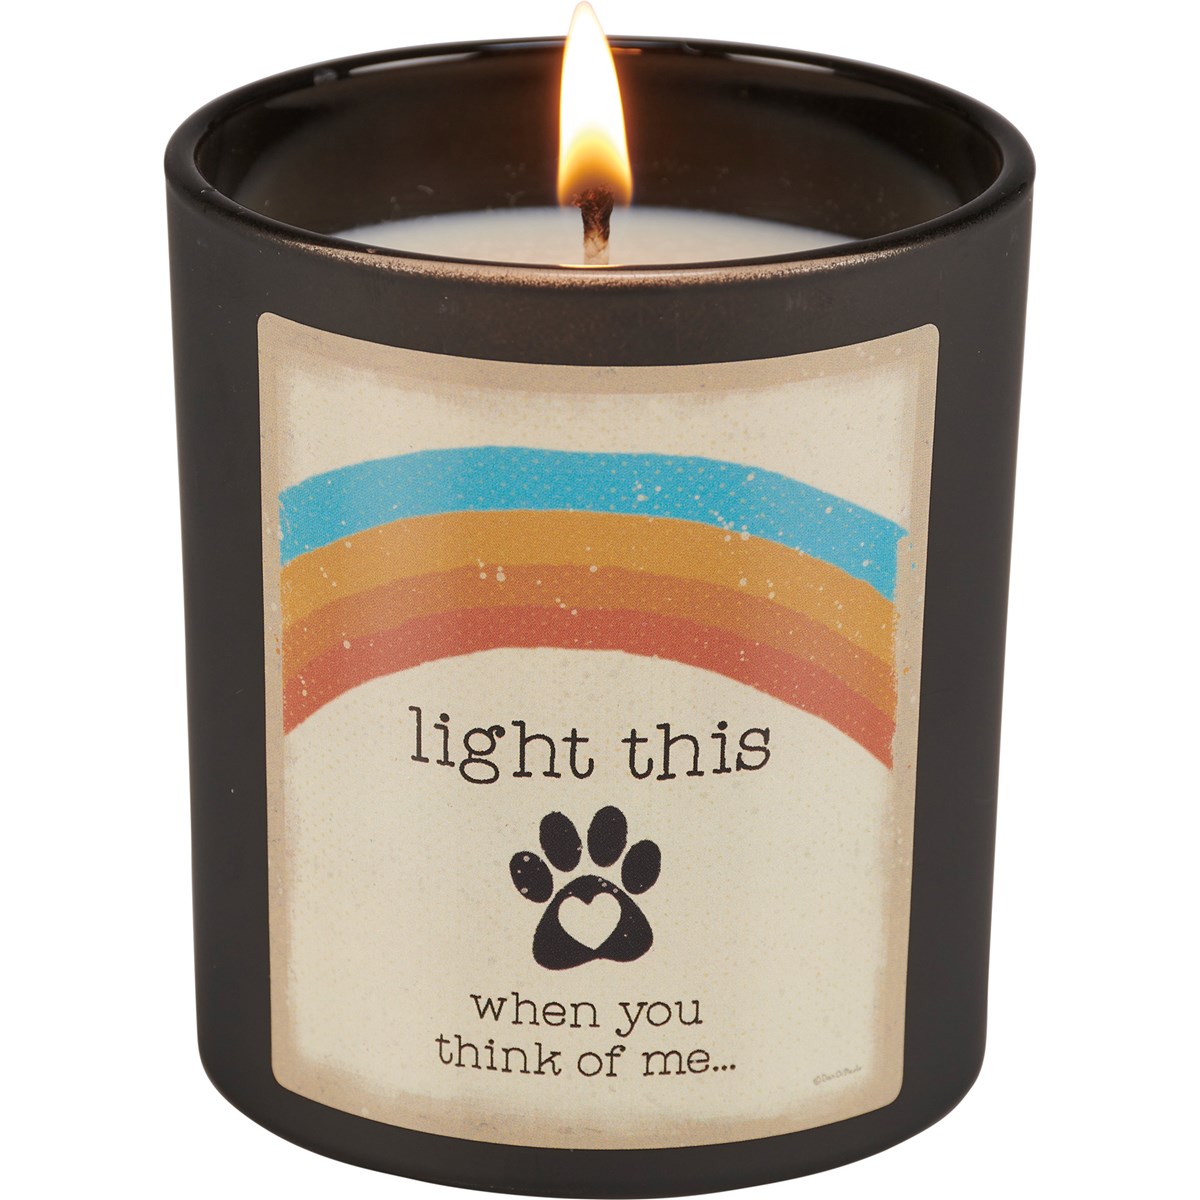 Light This Think Of Me Candle - Soy Wax, Glass, Cotton